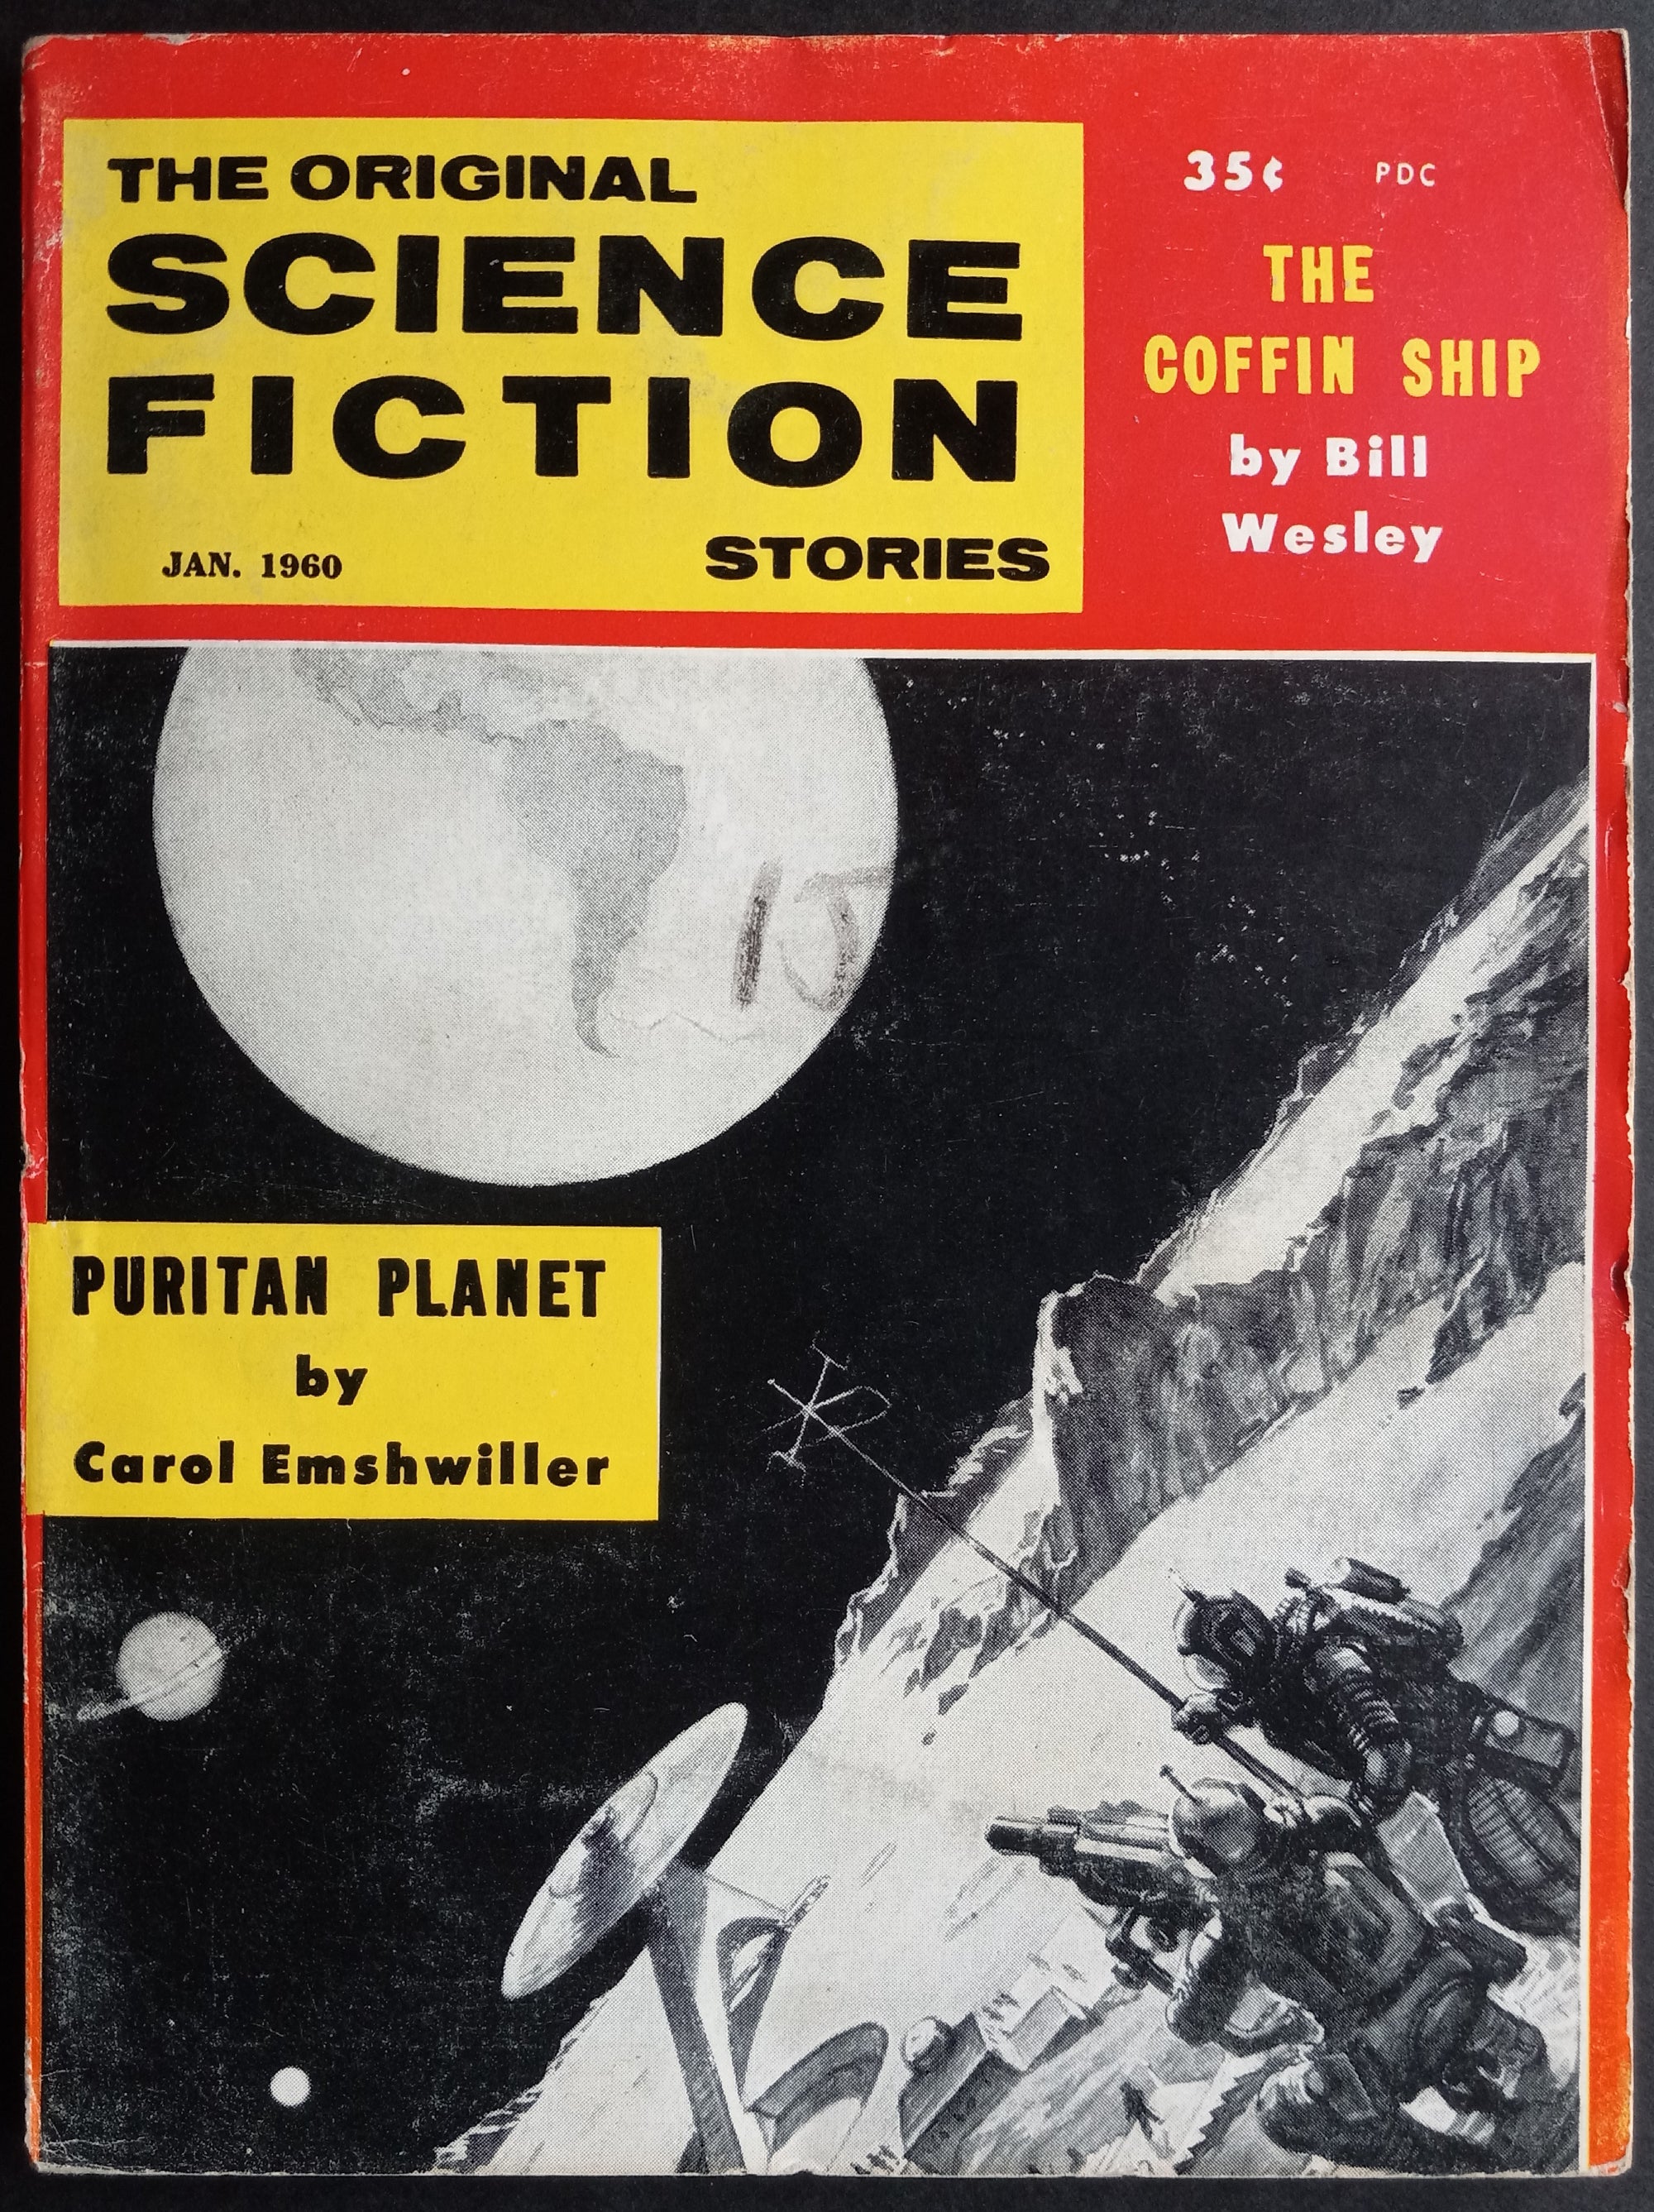 SCIENCE FICTION STORIES - January, 1960